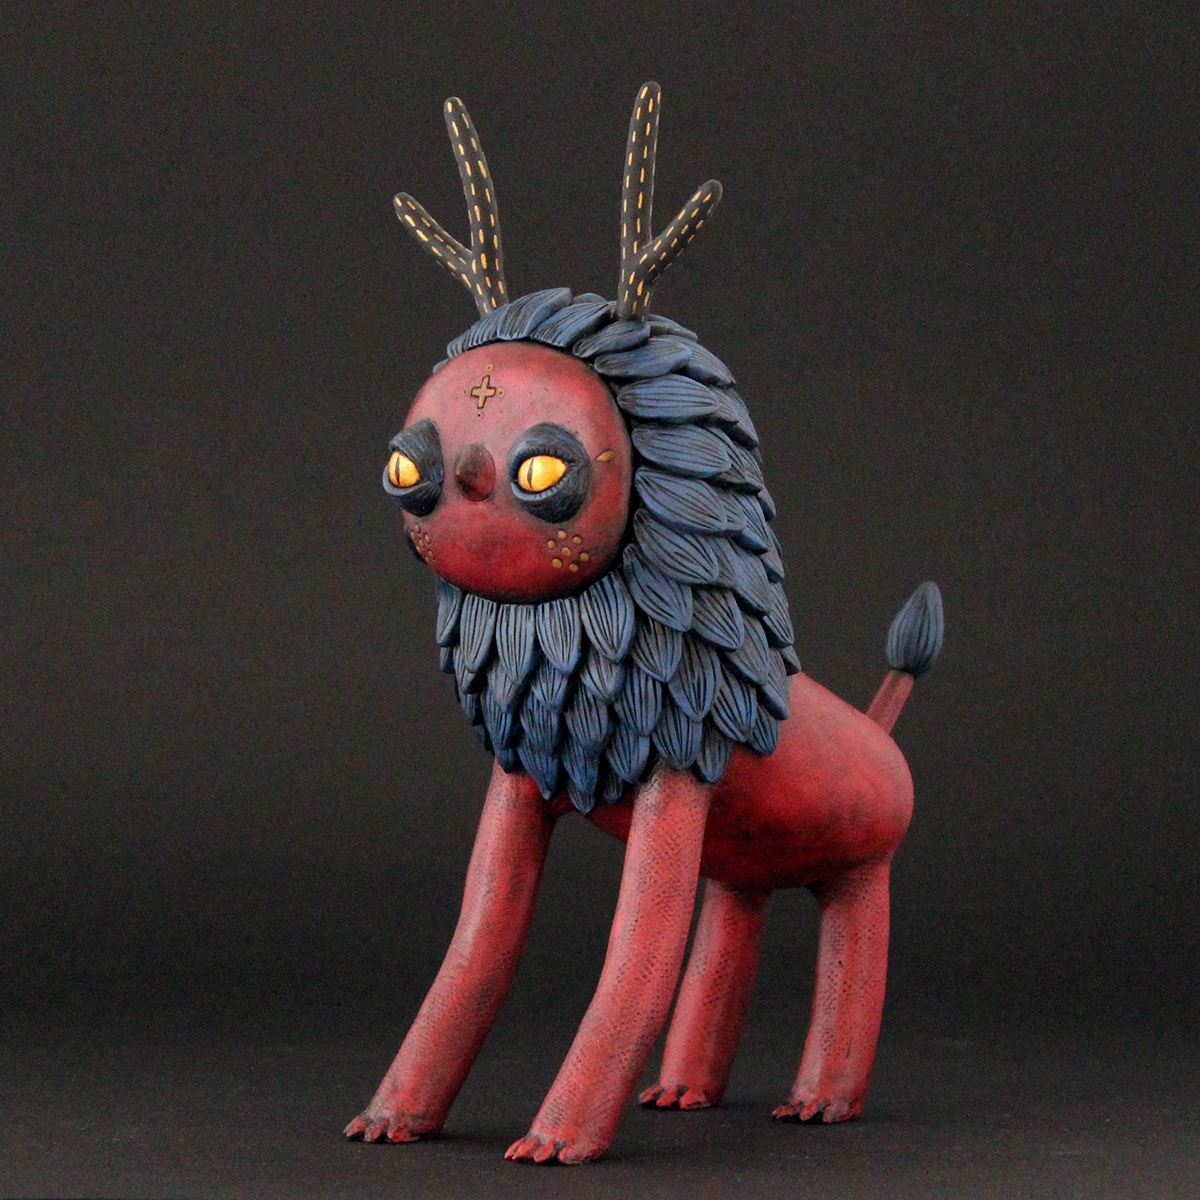 Polymer clay sculpture of an imaginary creature in red and blue